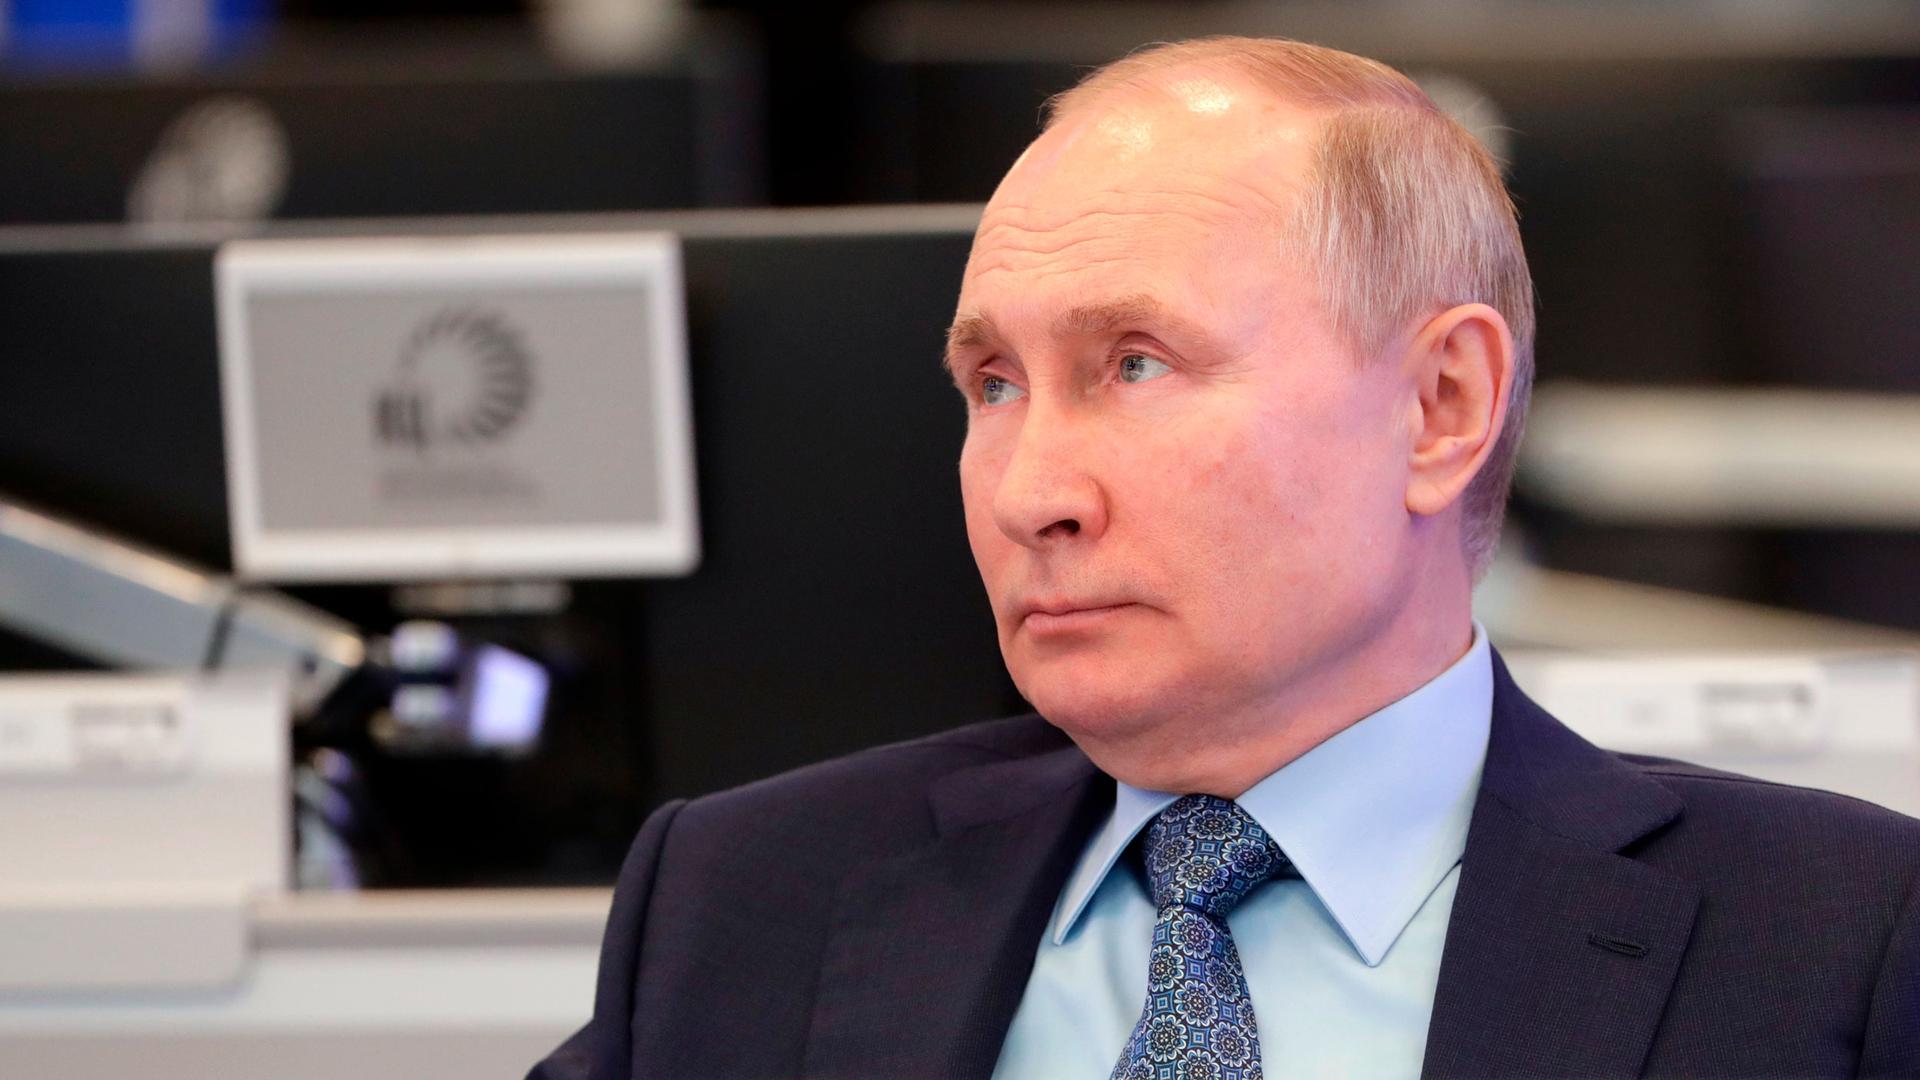 Russian President Vladimir Putin is shown in a close-up photograph wearing a dark suit and tie and looking off to his right.